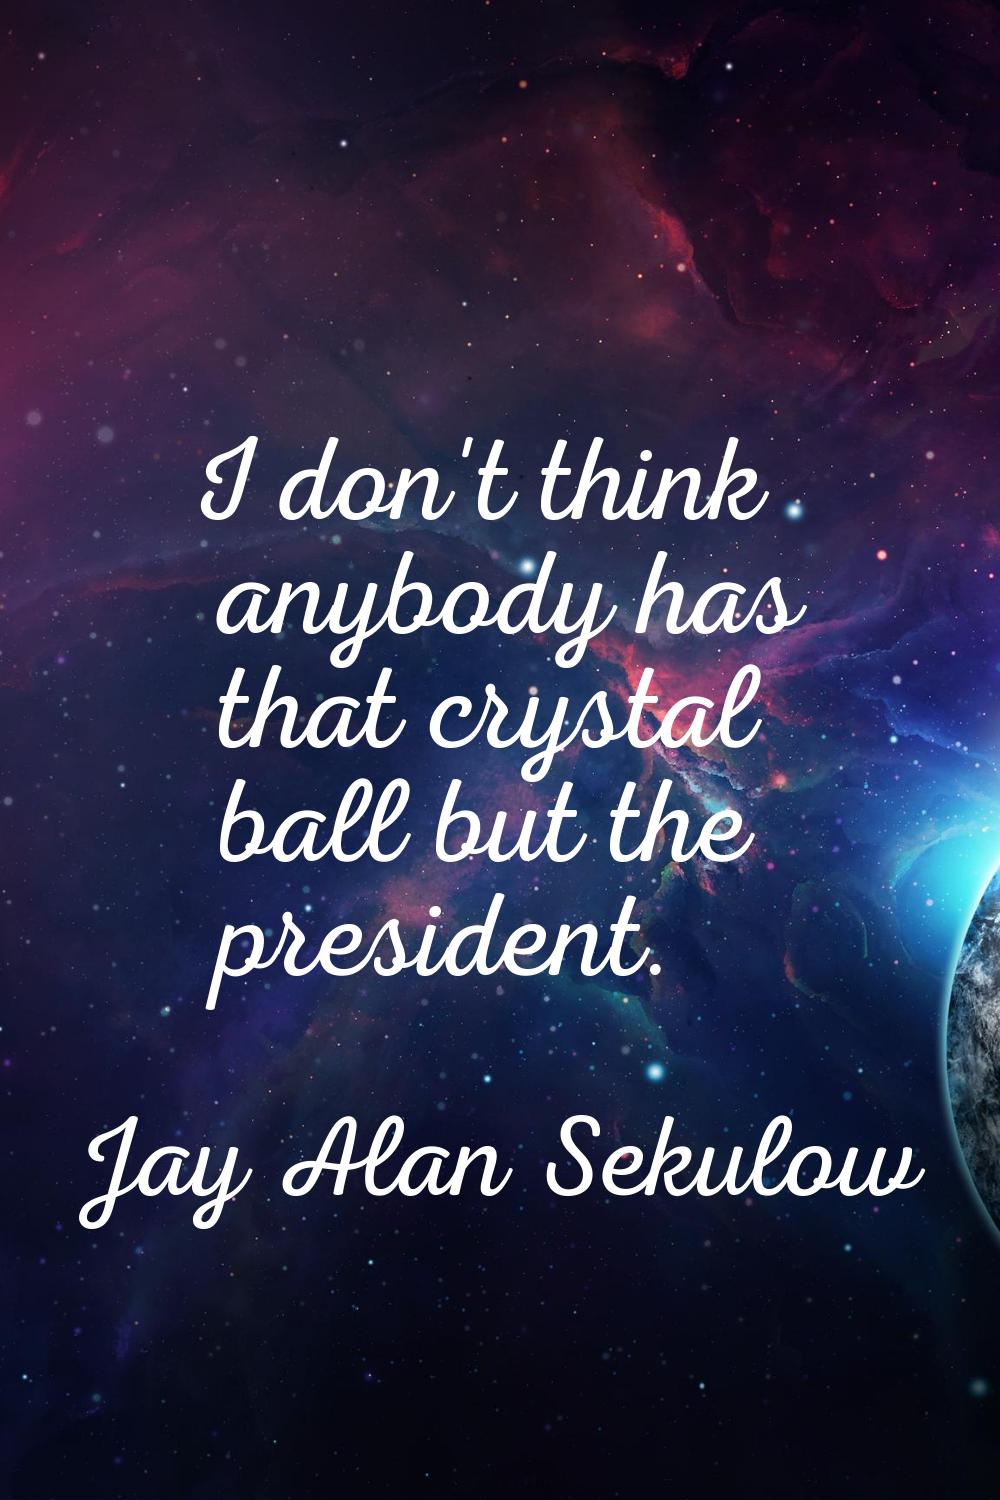 I don't think anybody has that crystal ball but the president.